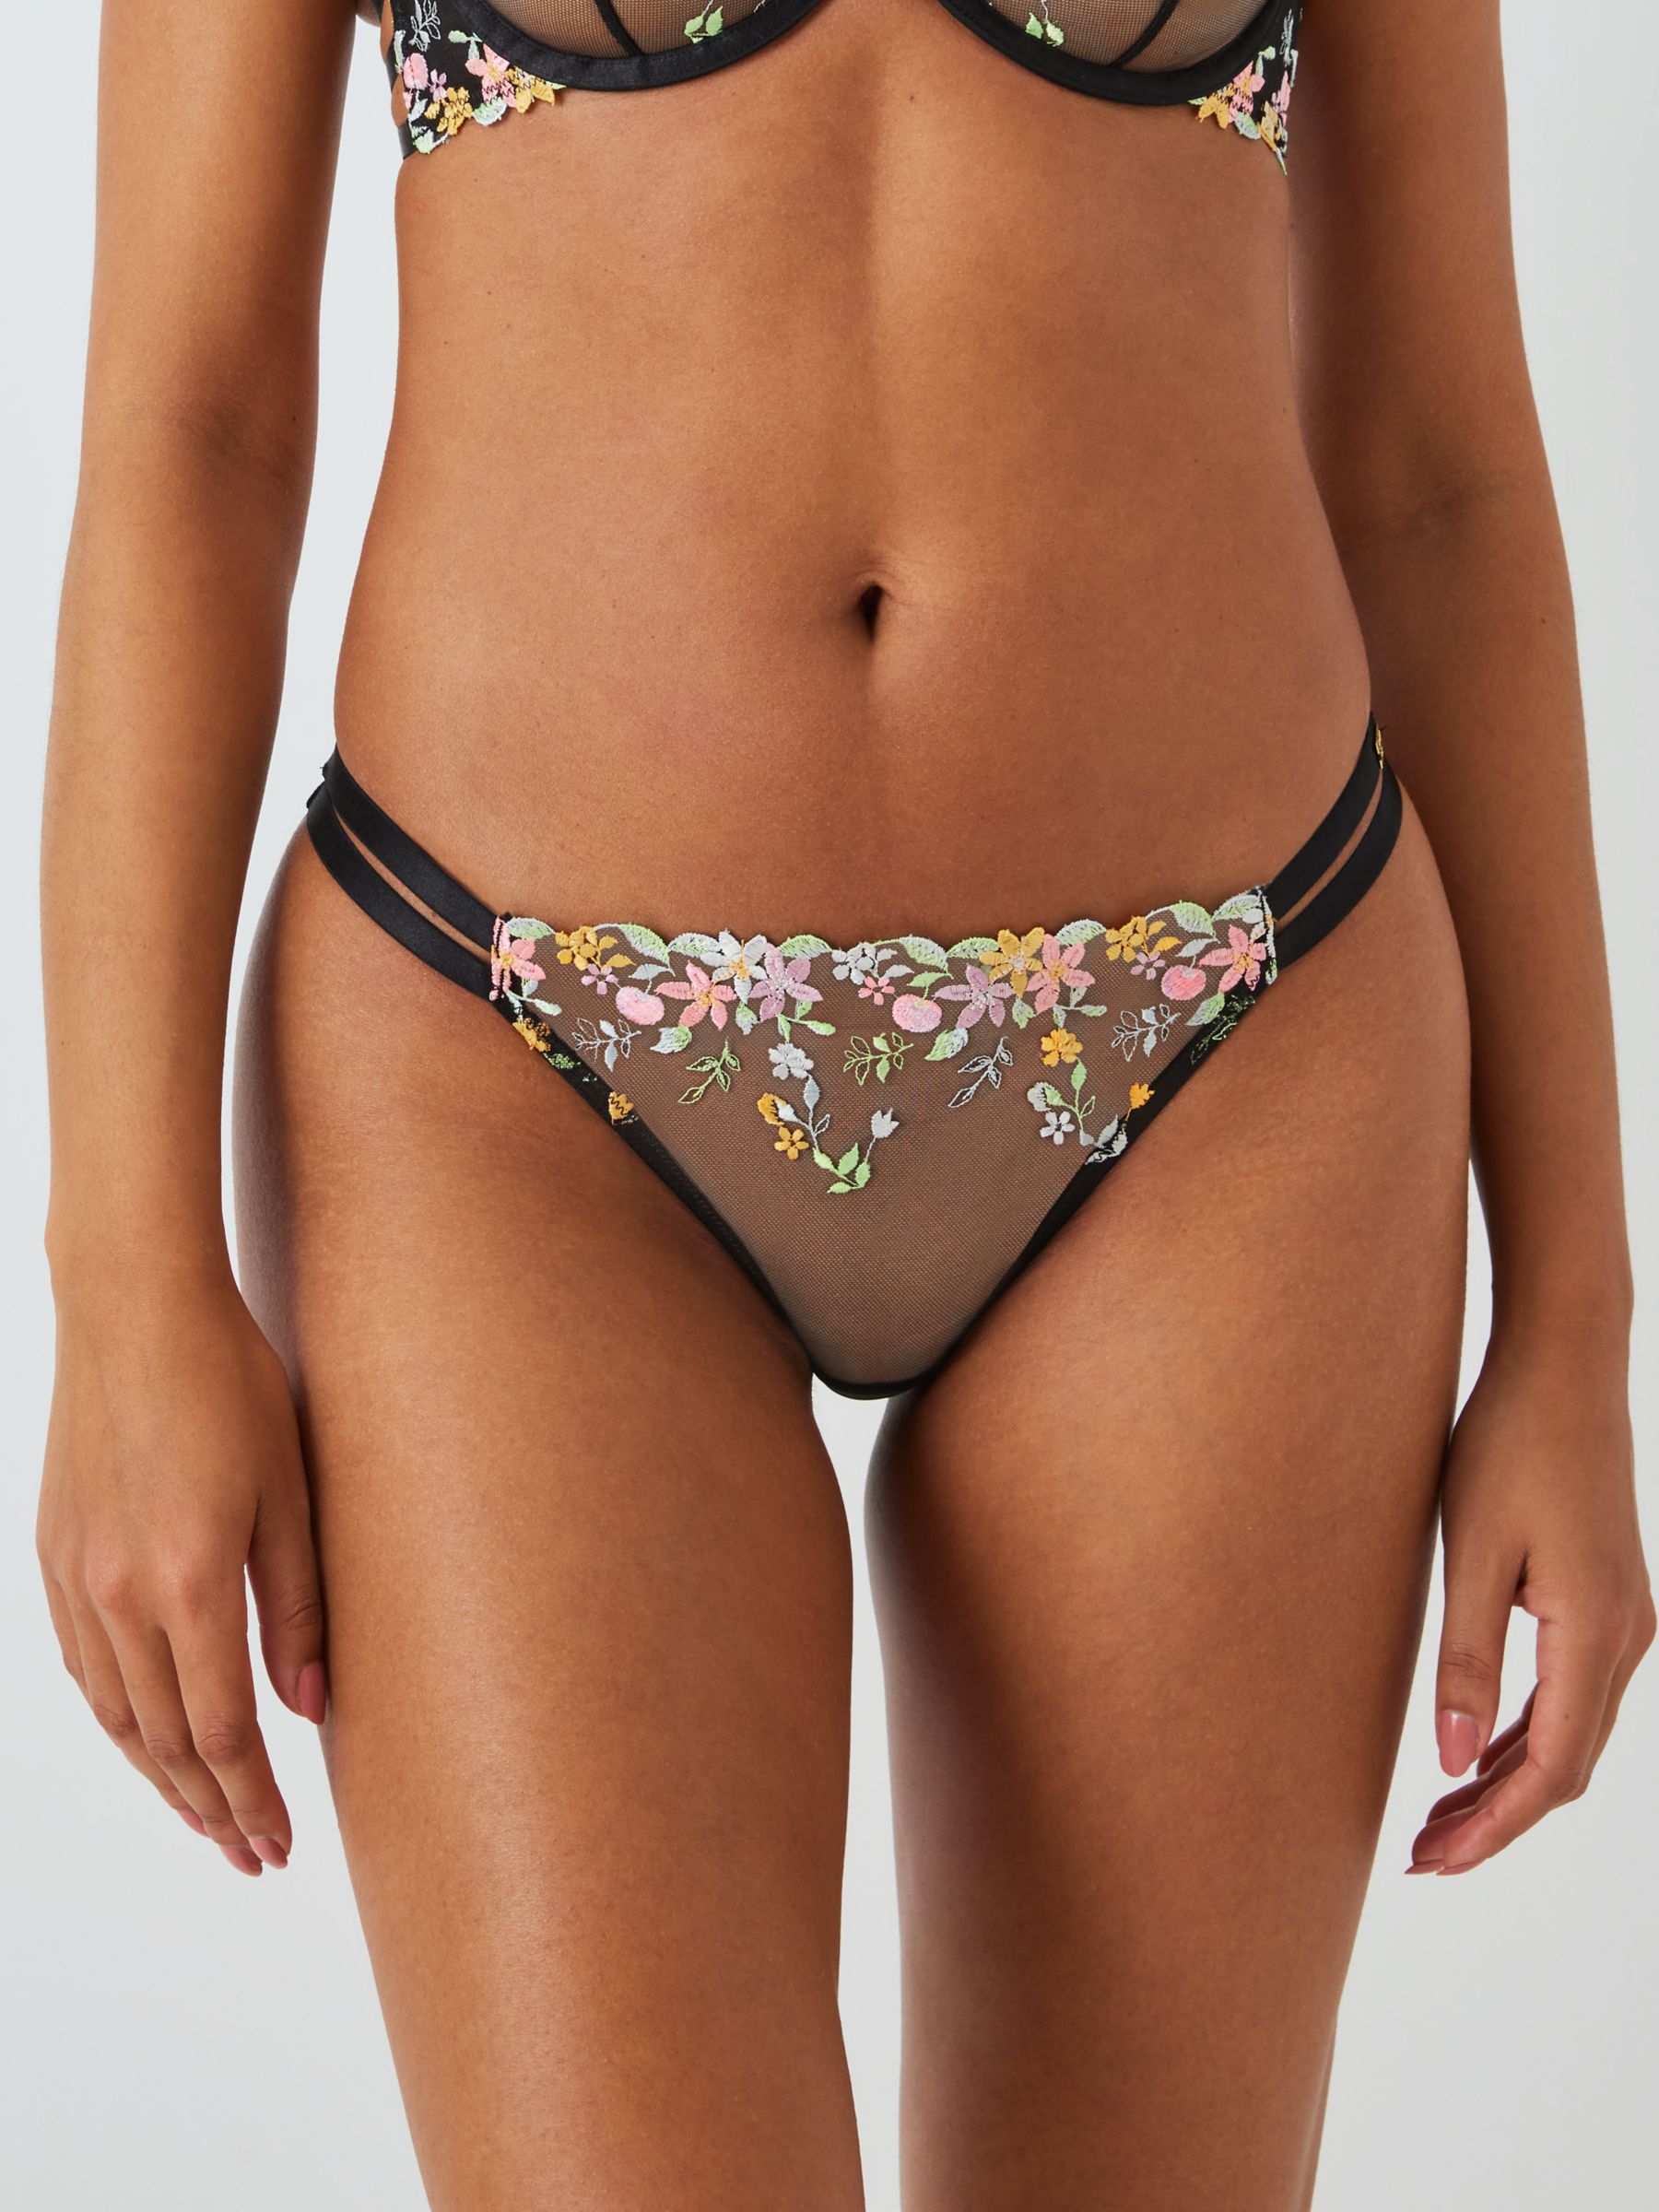 AND/OR Alexis Floral Thong, Black/Multi, 10